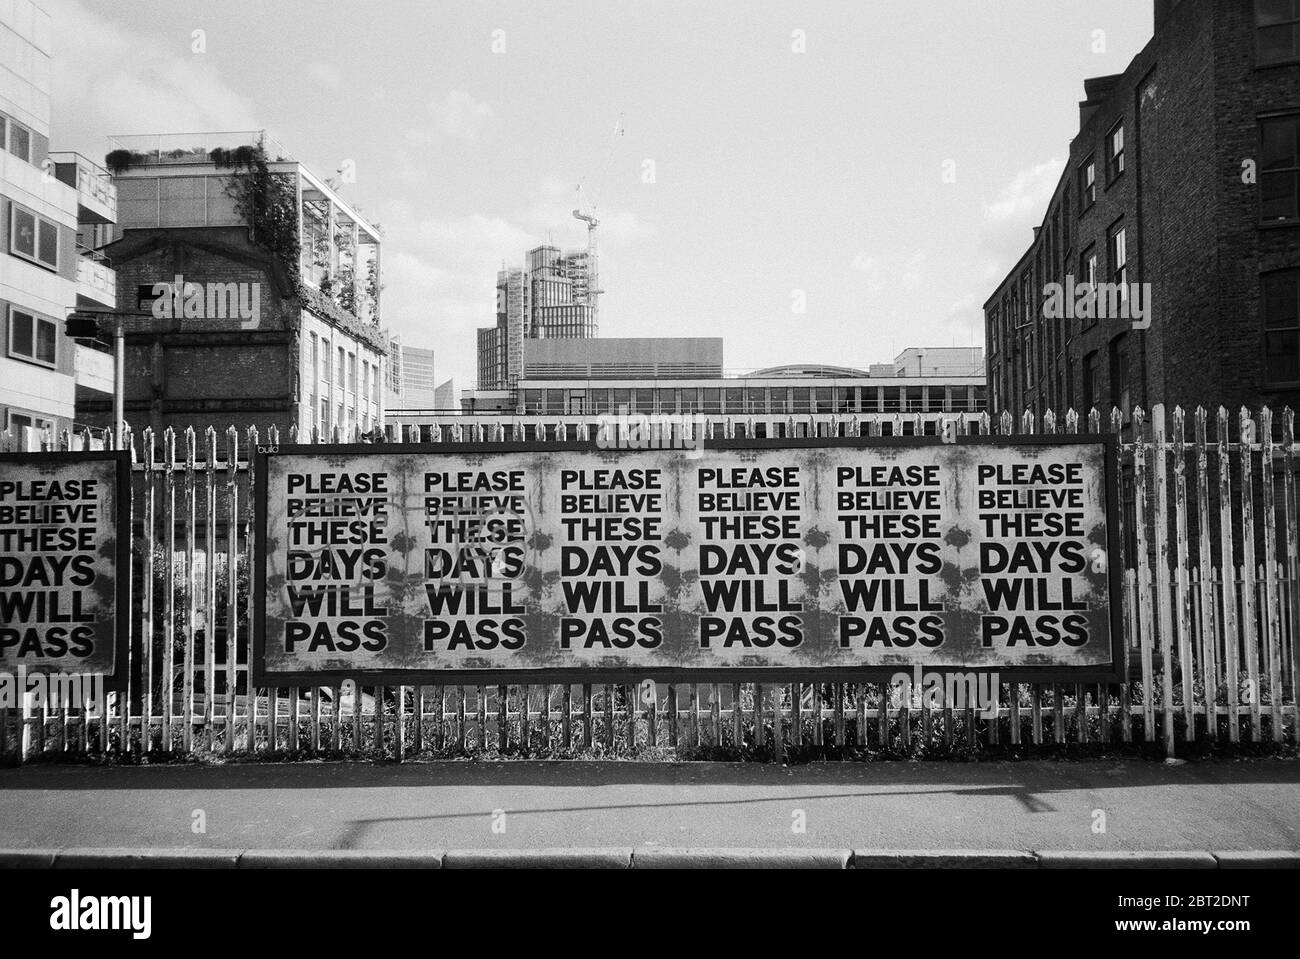 Posters on a fence in Shoreditch, East London UK, during the coronavirus lockdown, May 2020 Stock Photo